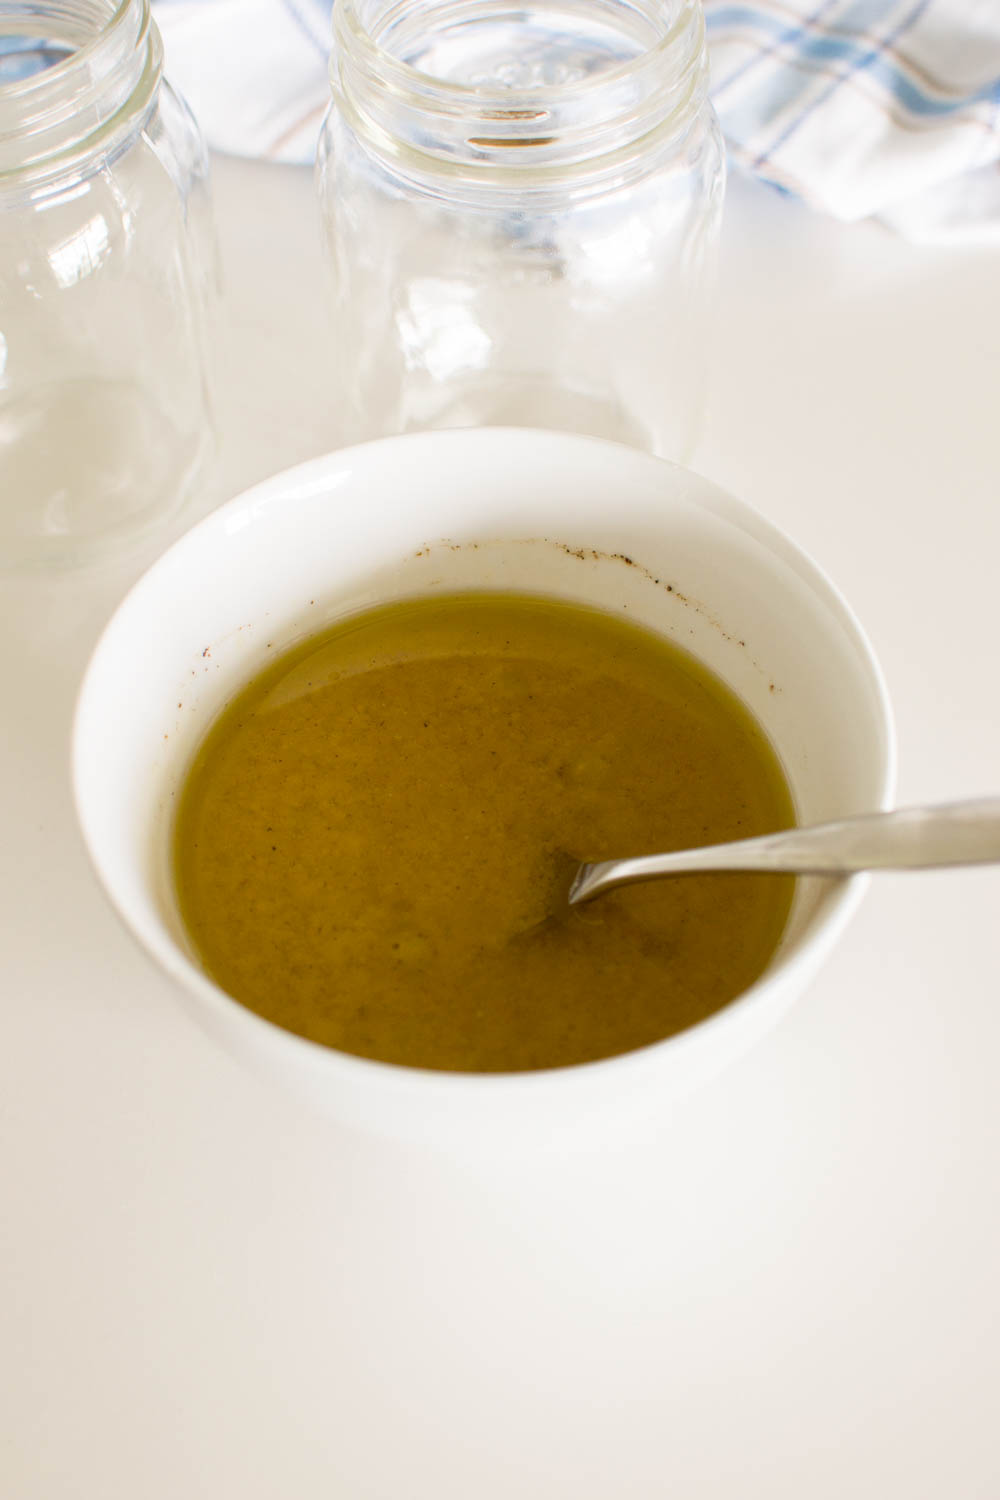 Olive oil dressing in a white bowl being mixed with a small spoon